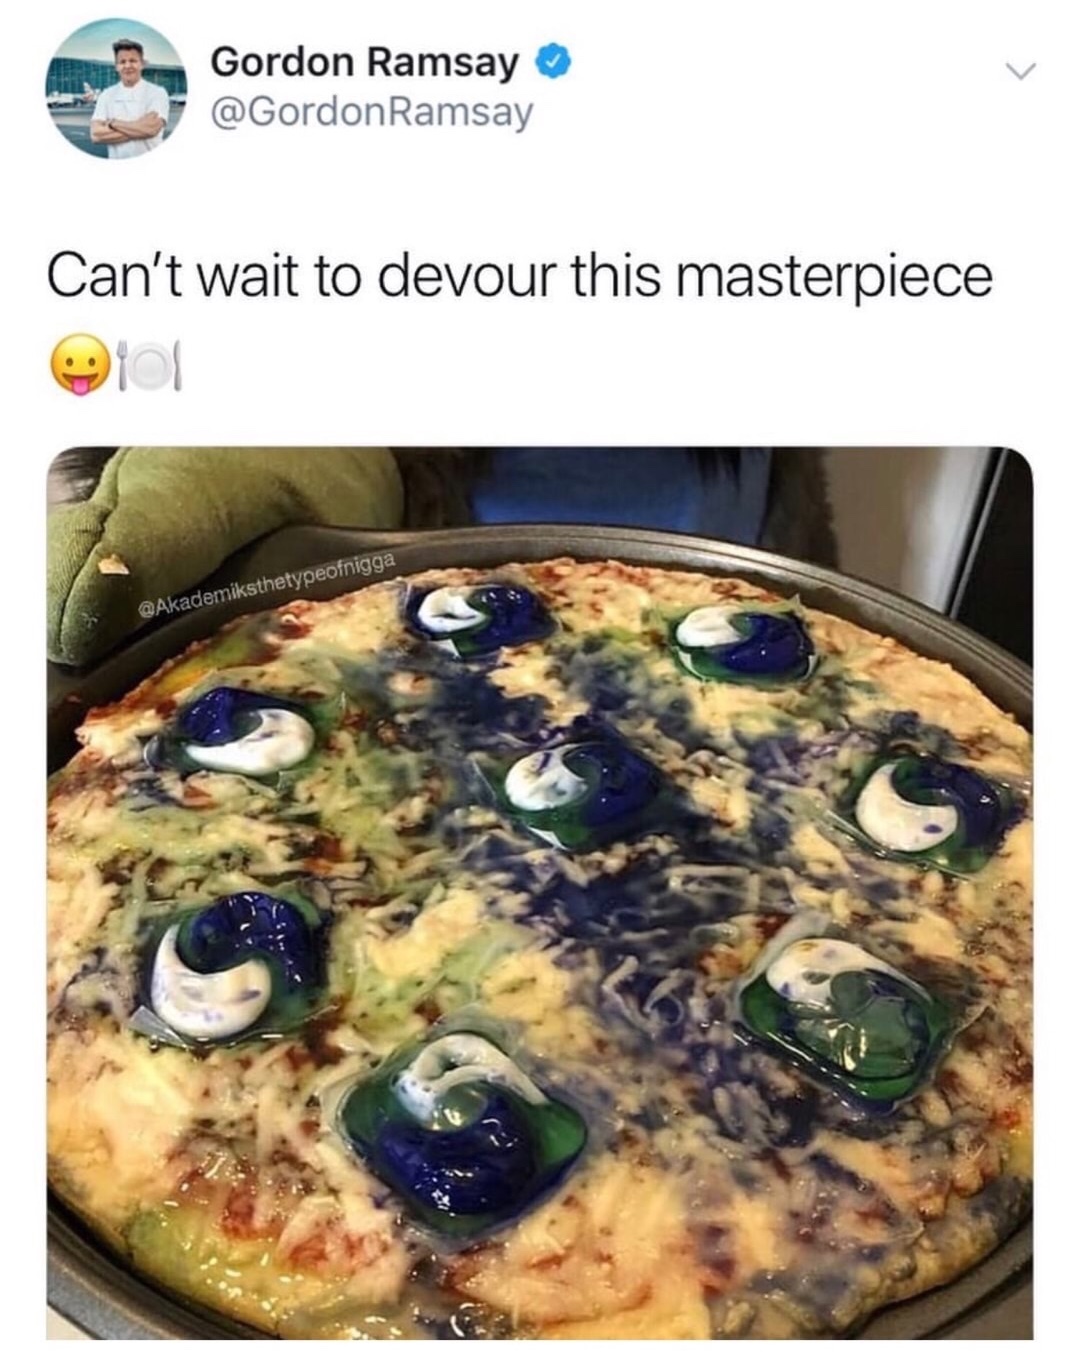 tide pod furry pizza - Gordon Ramsay Ramsay Can't wait to devour this masterpiece